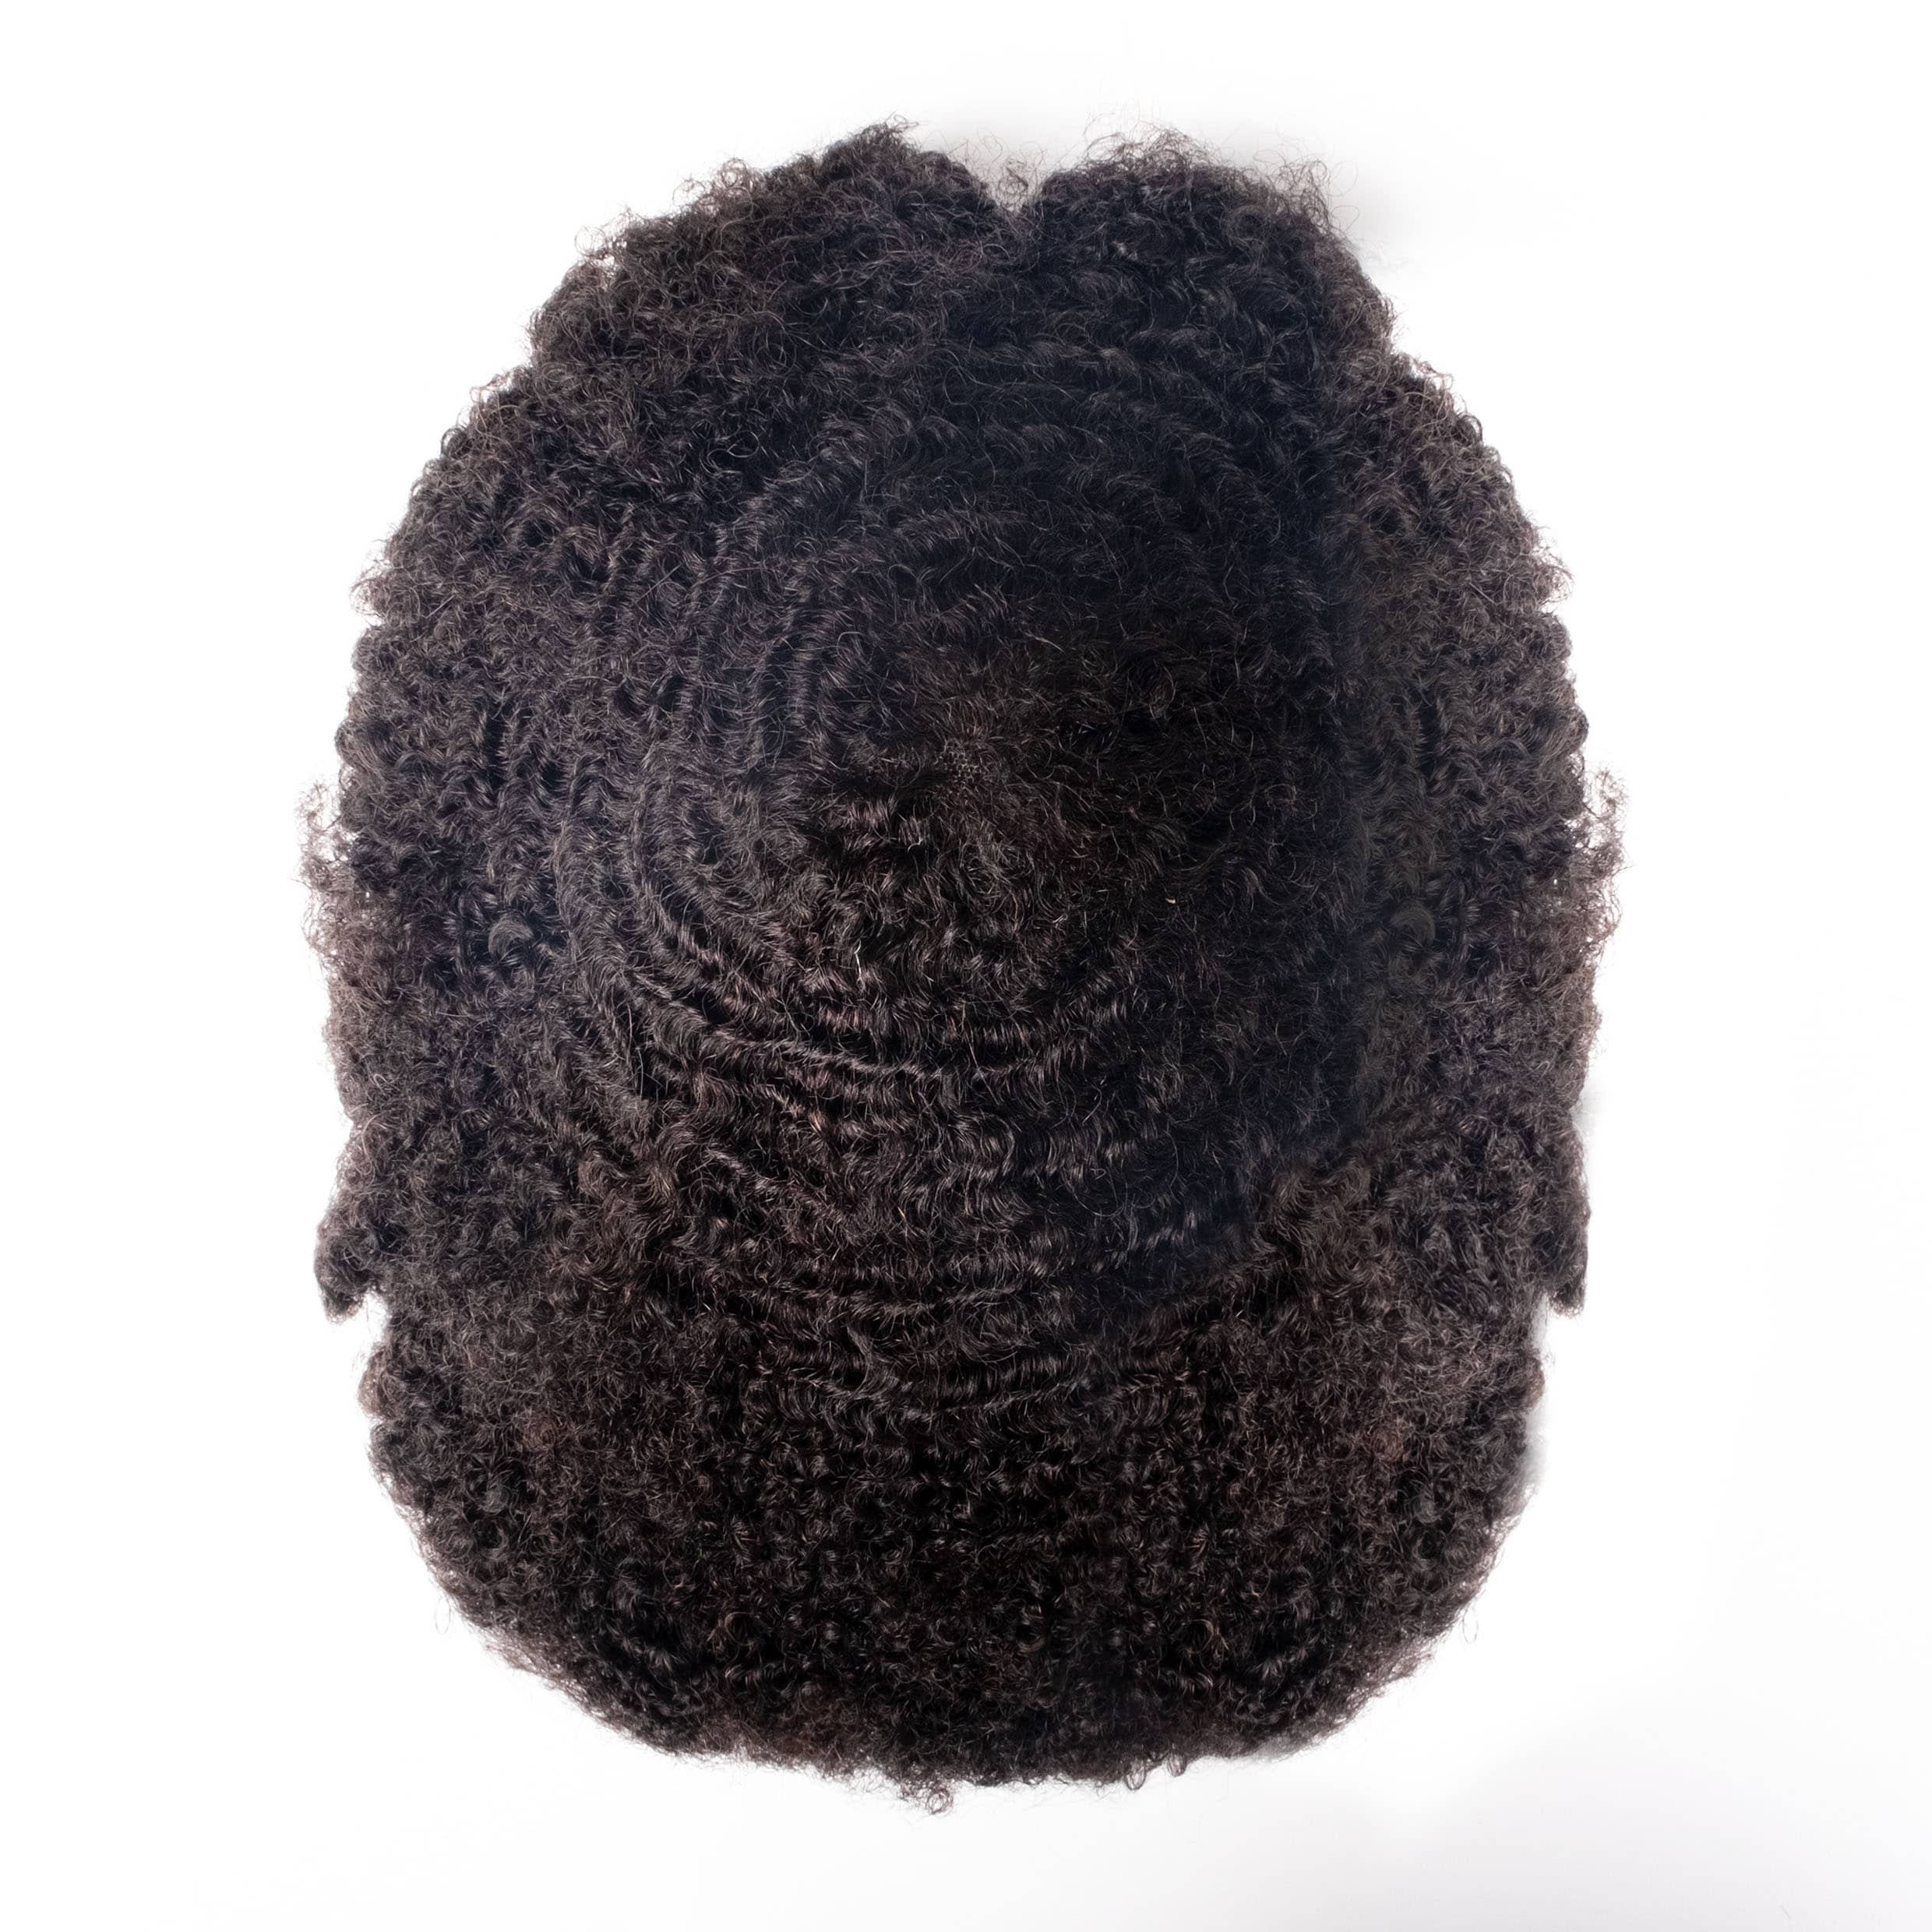 GEXWIGS Afro American Afro Men's Hair System Full Lace 